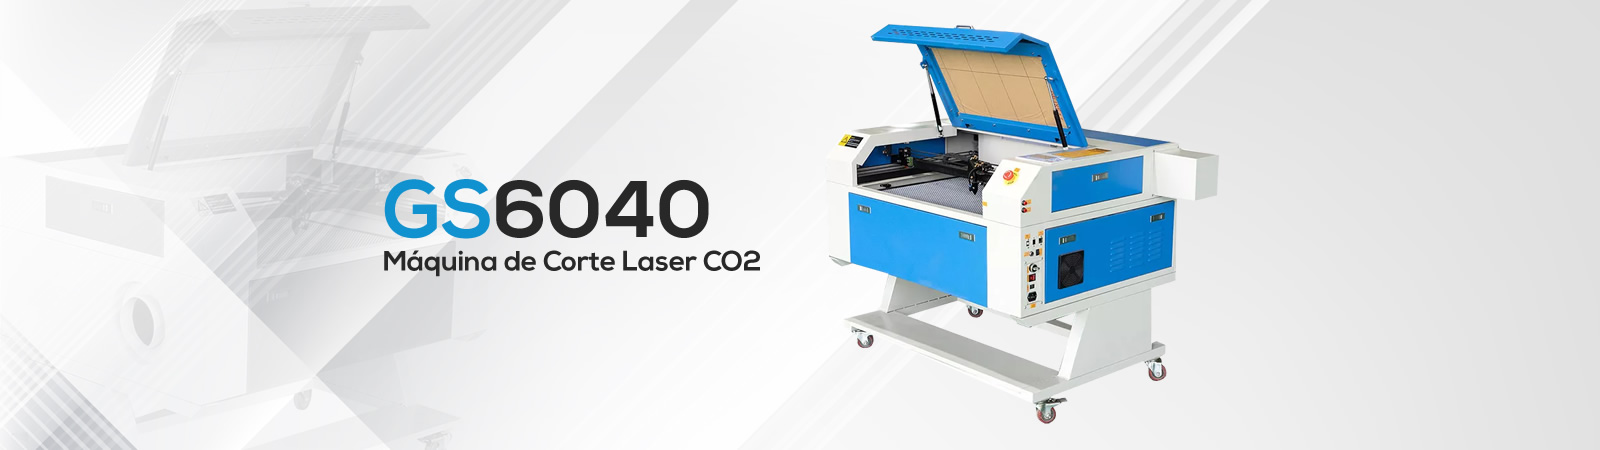 Maquina_Laser_CO2_GS6040_Banner_01